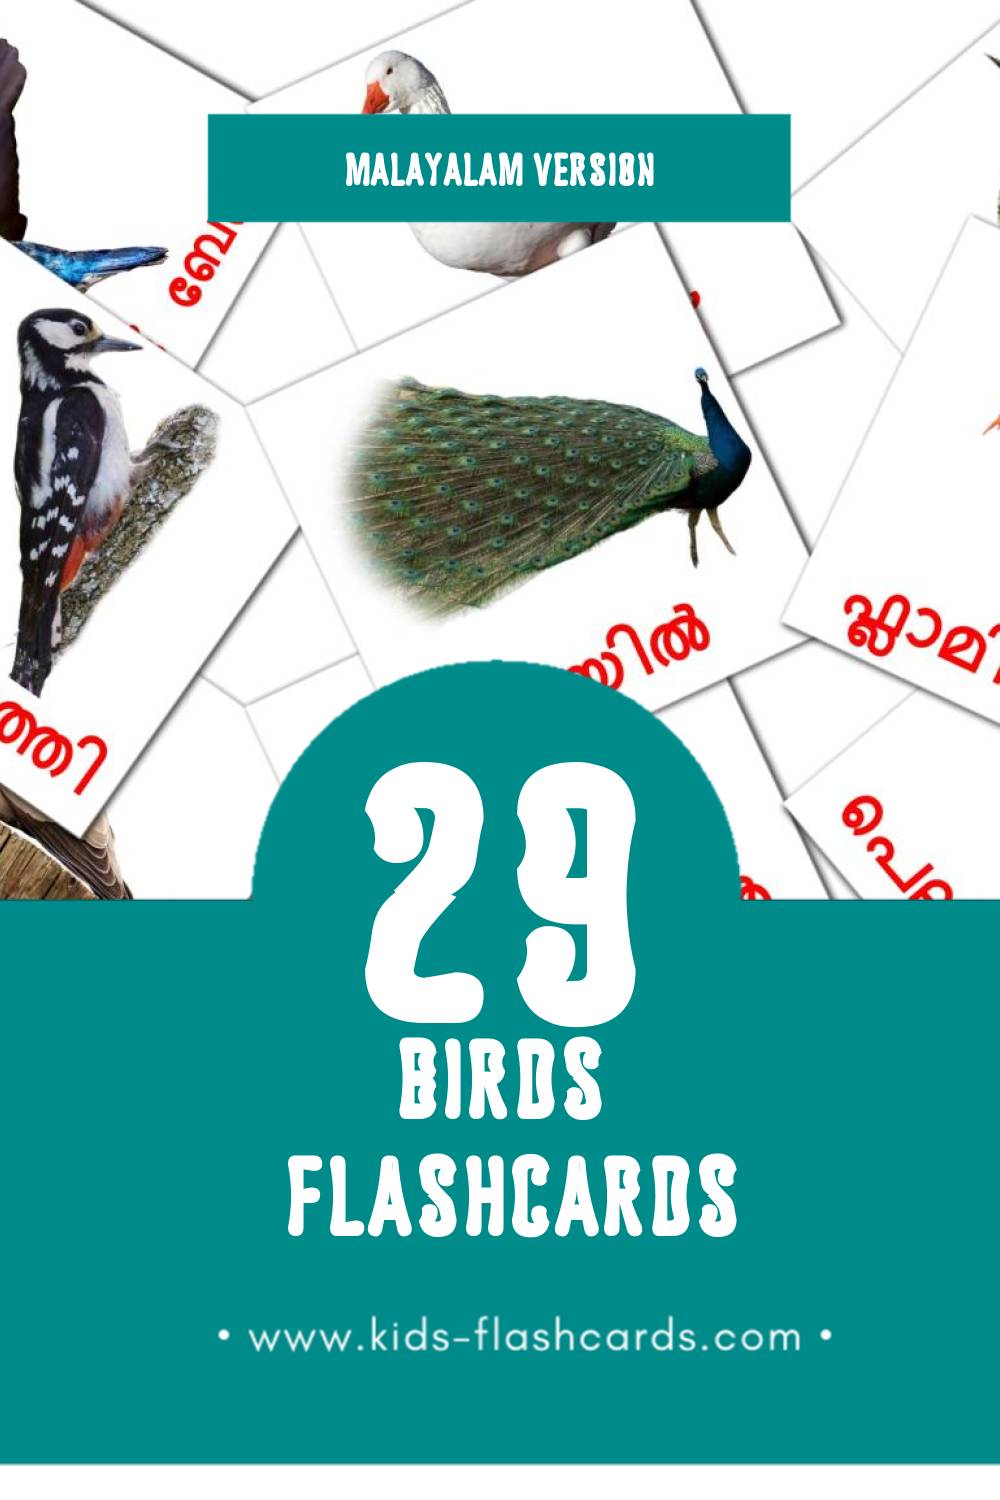 Visual പക്ഷികൾ Flashcards for Toddlers (29 cards in Malayalam)